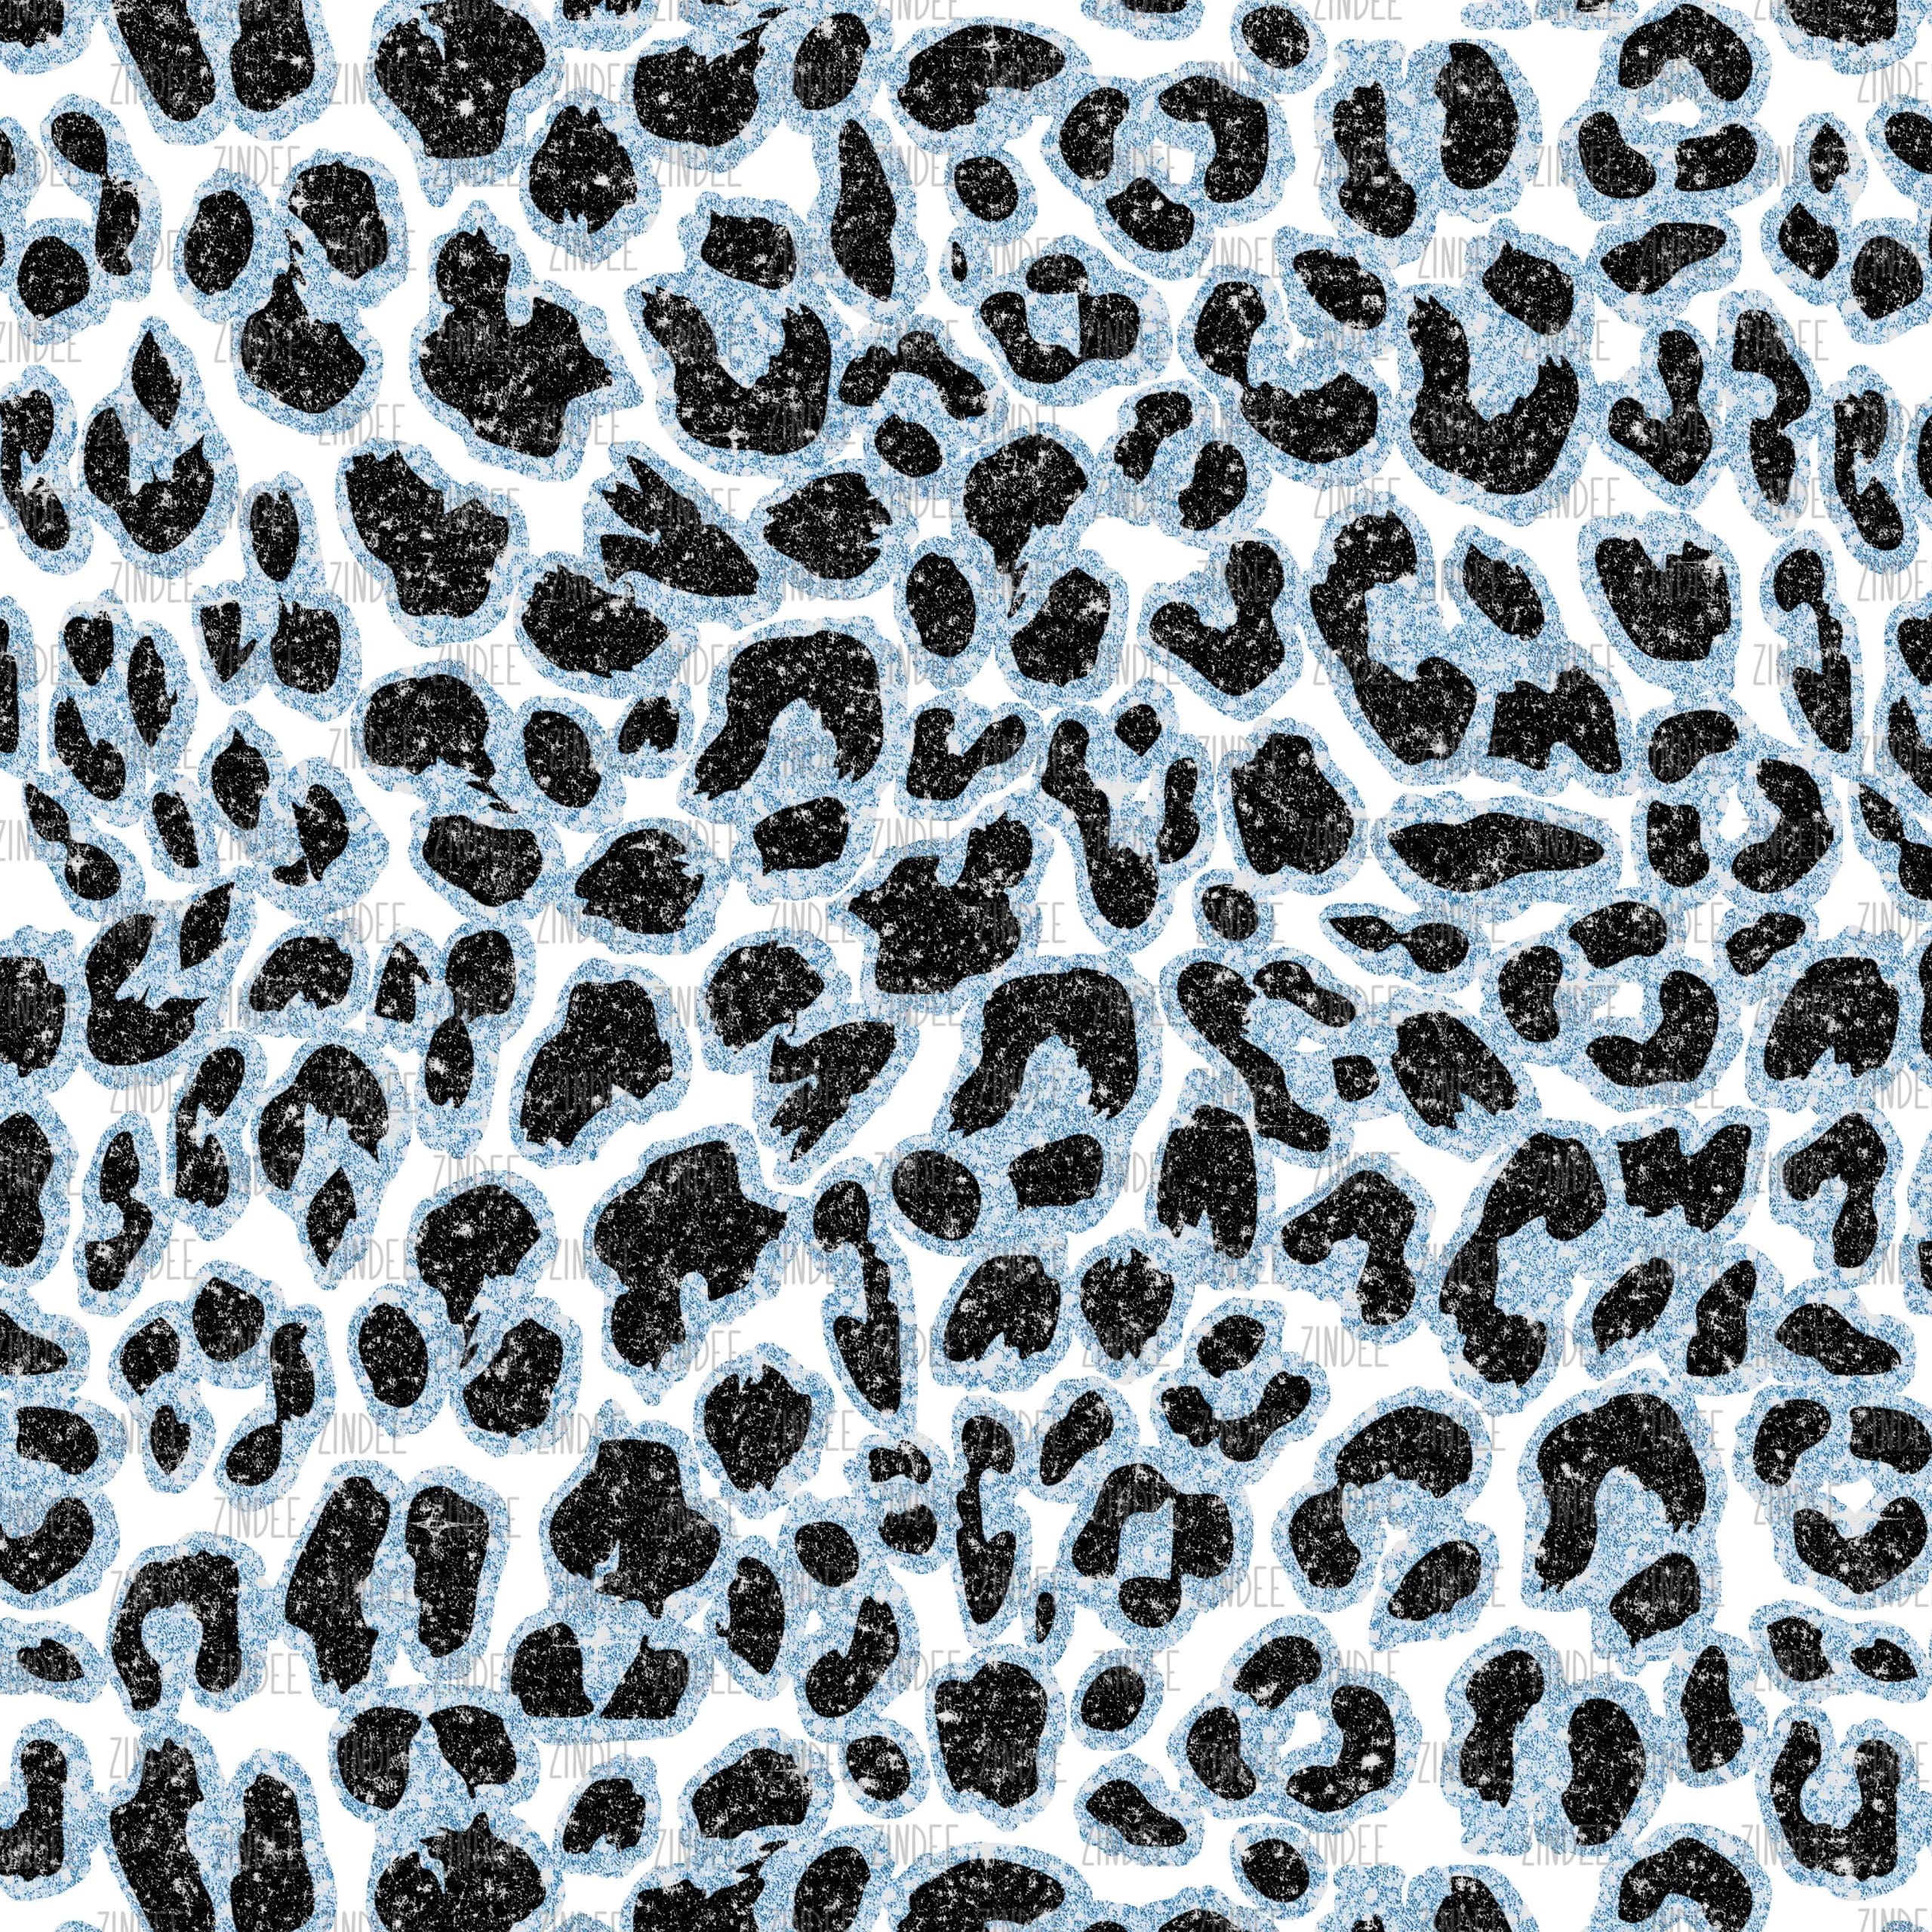 Blue and Black Glitter Leopard (vinyl) – Acrylic Blanks, Stickers, Printed  Vinyl, Glitter and more!